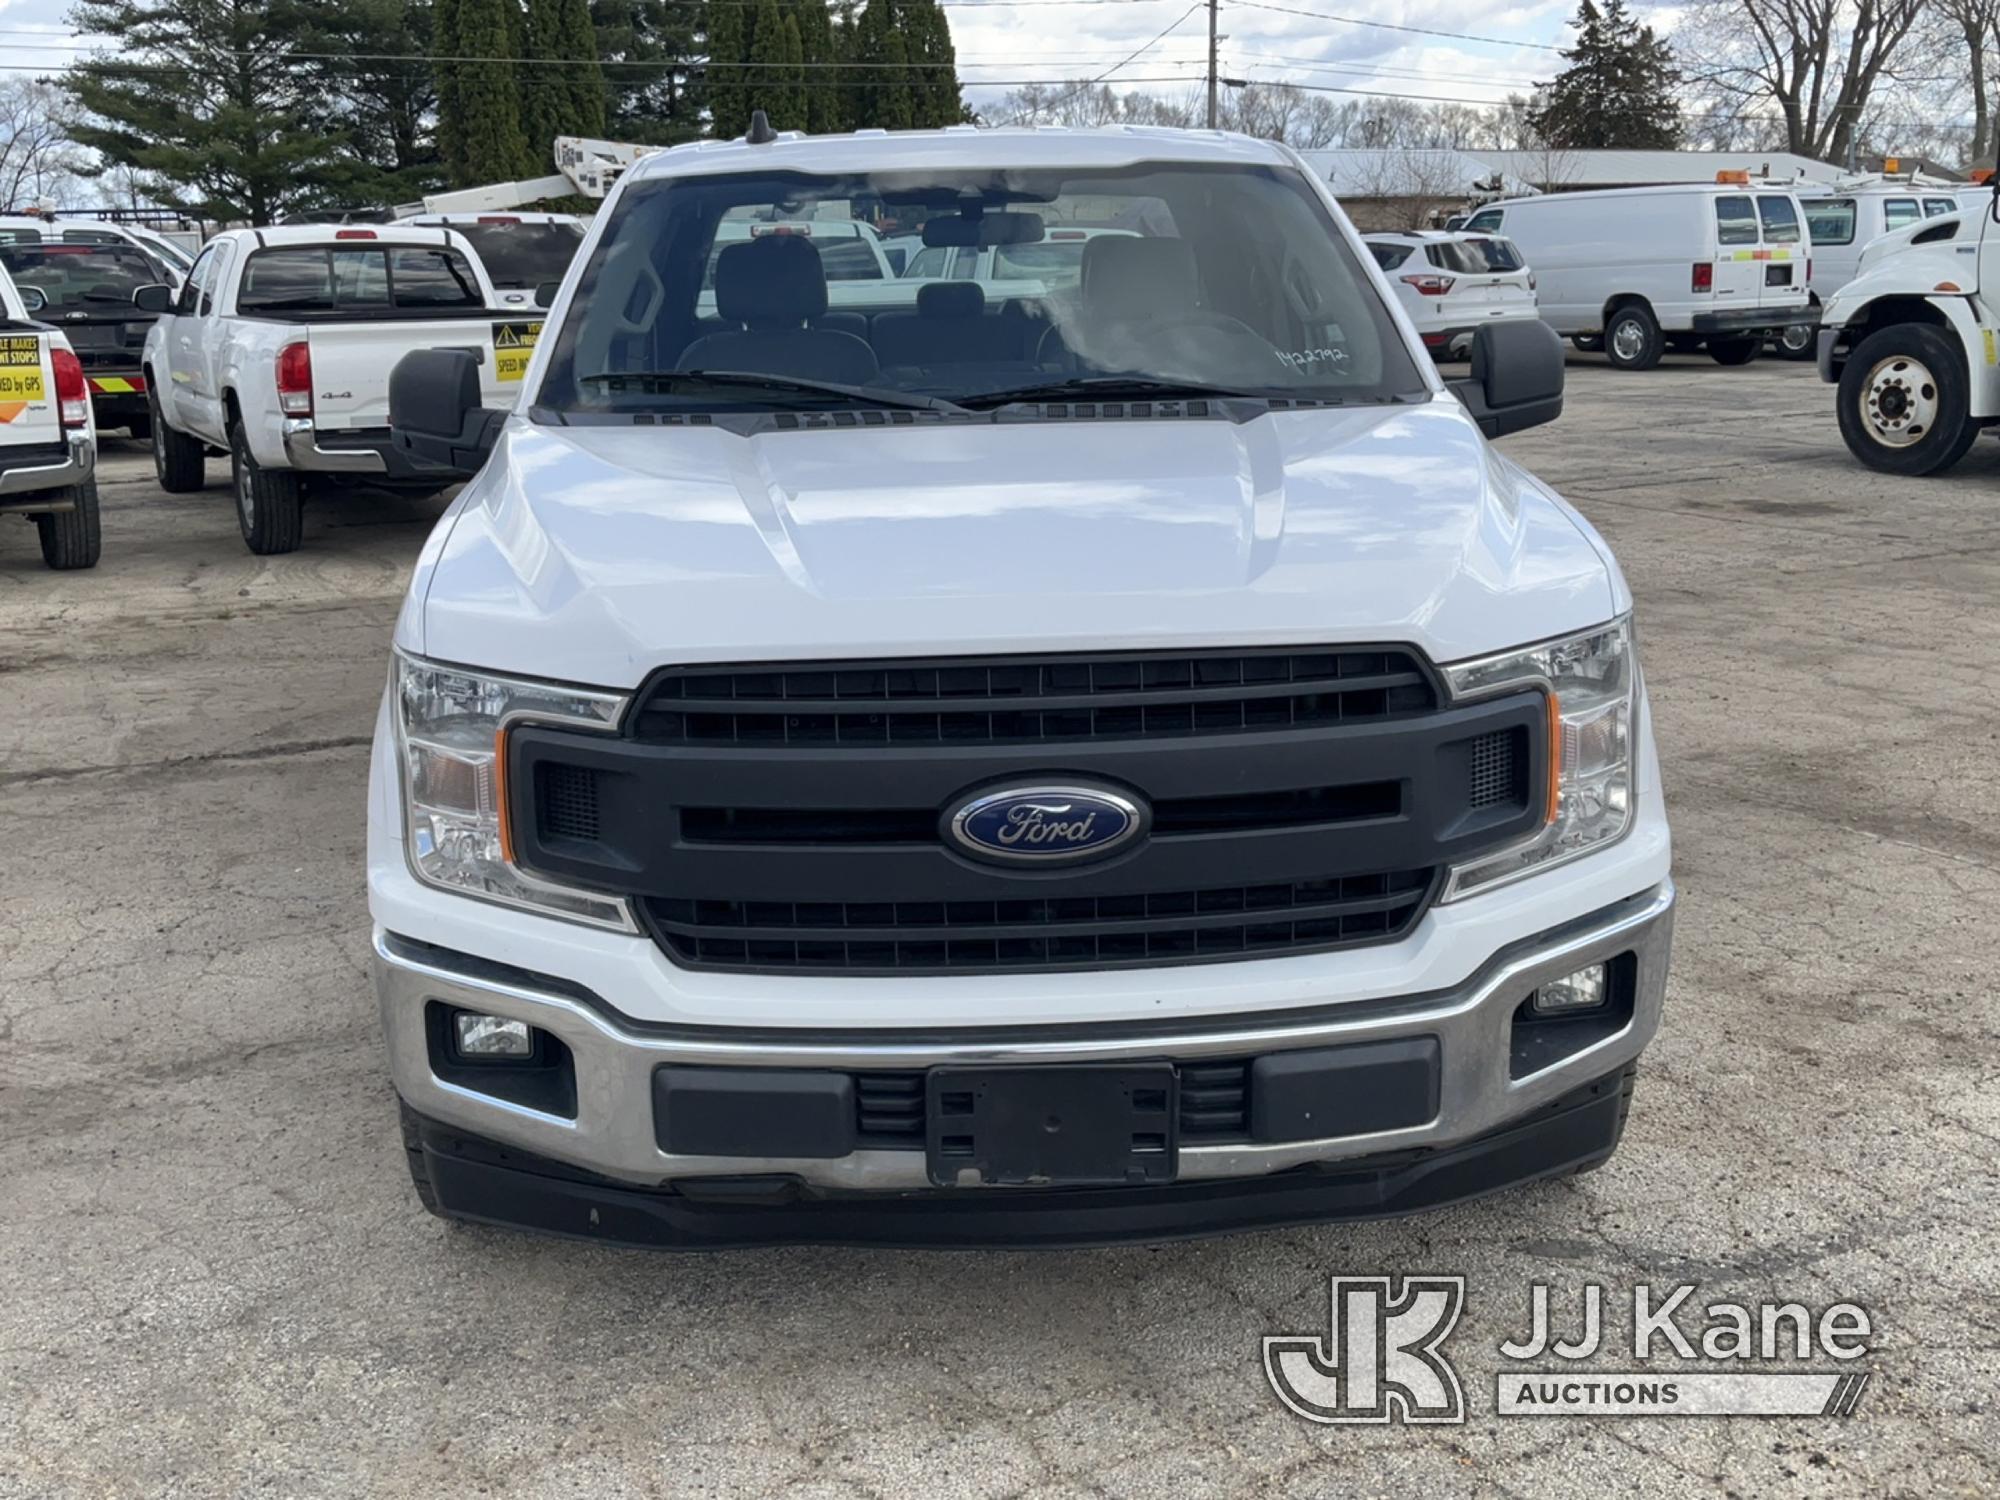 (South Beloit, IL) 2020 Ford F150 Extended-Cab Pickup Truck Runs & Moves) (Check Engine Light On, Mo